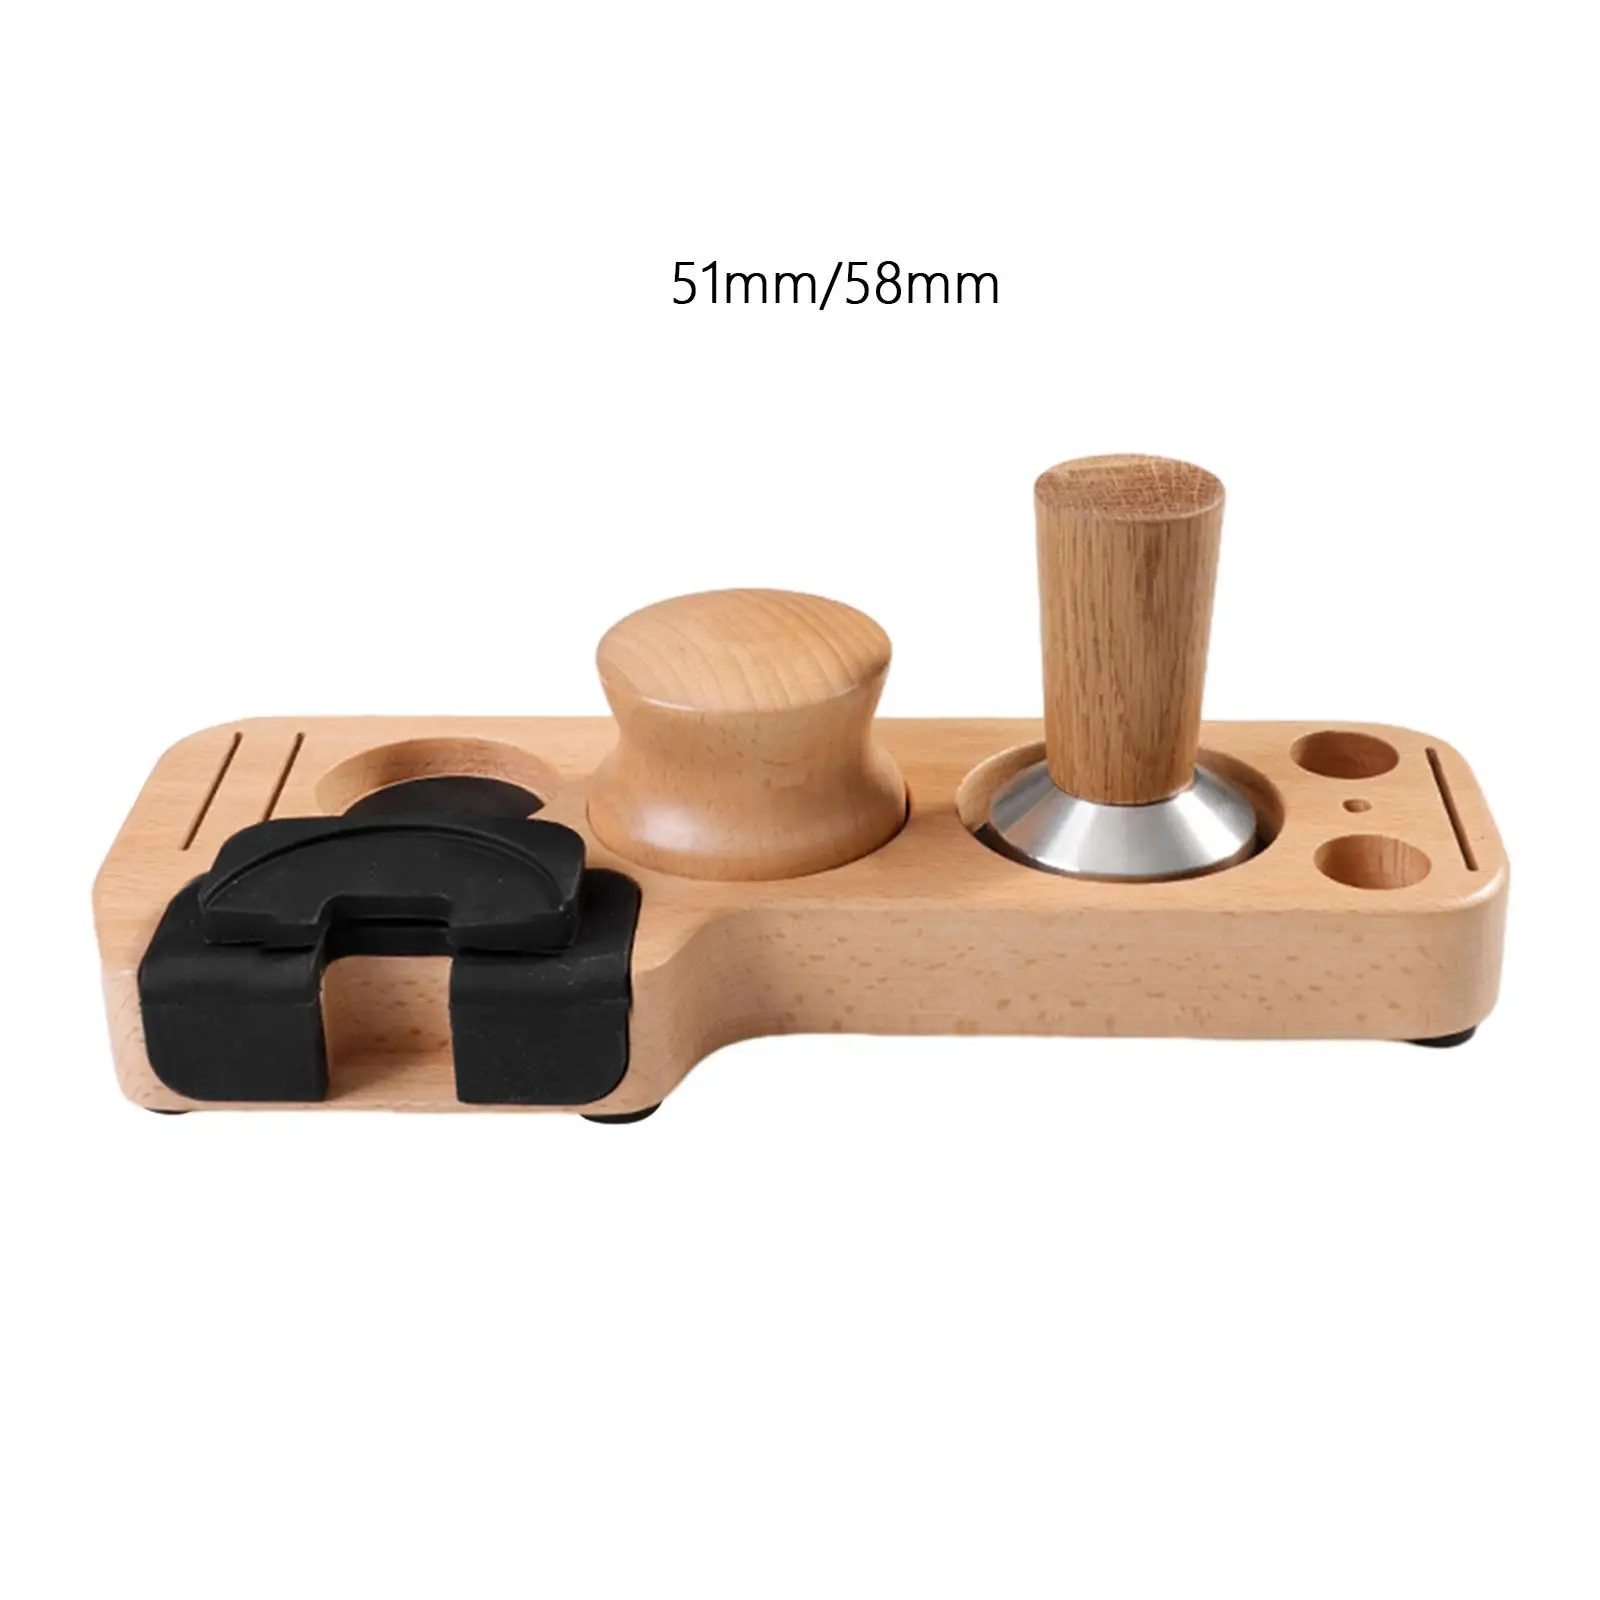 Espresso Tamping Stand Set Anti Slip Cafe Machine Supplies Wood Coffee Filter Tamper Holder Kits for Tearoom Counters Coffee Bar